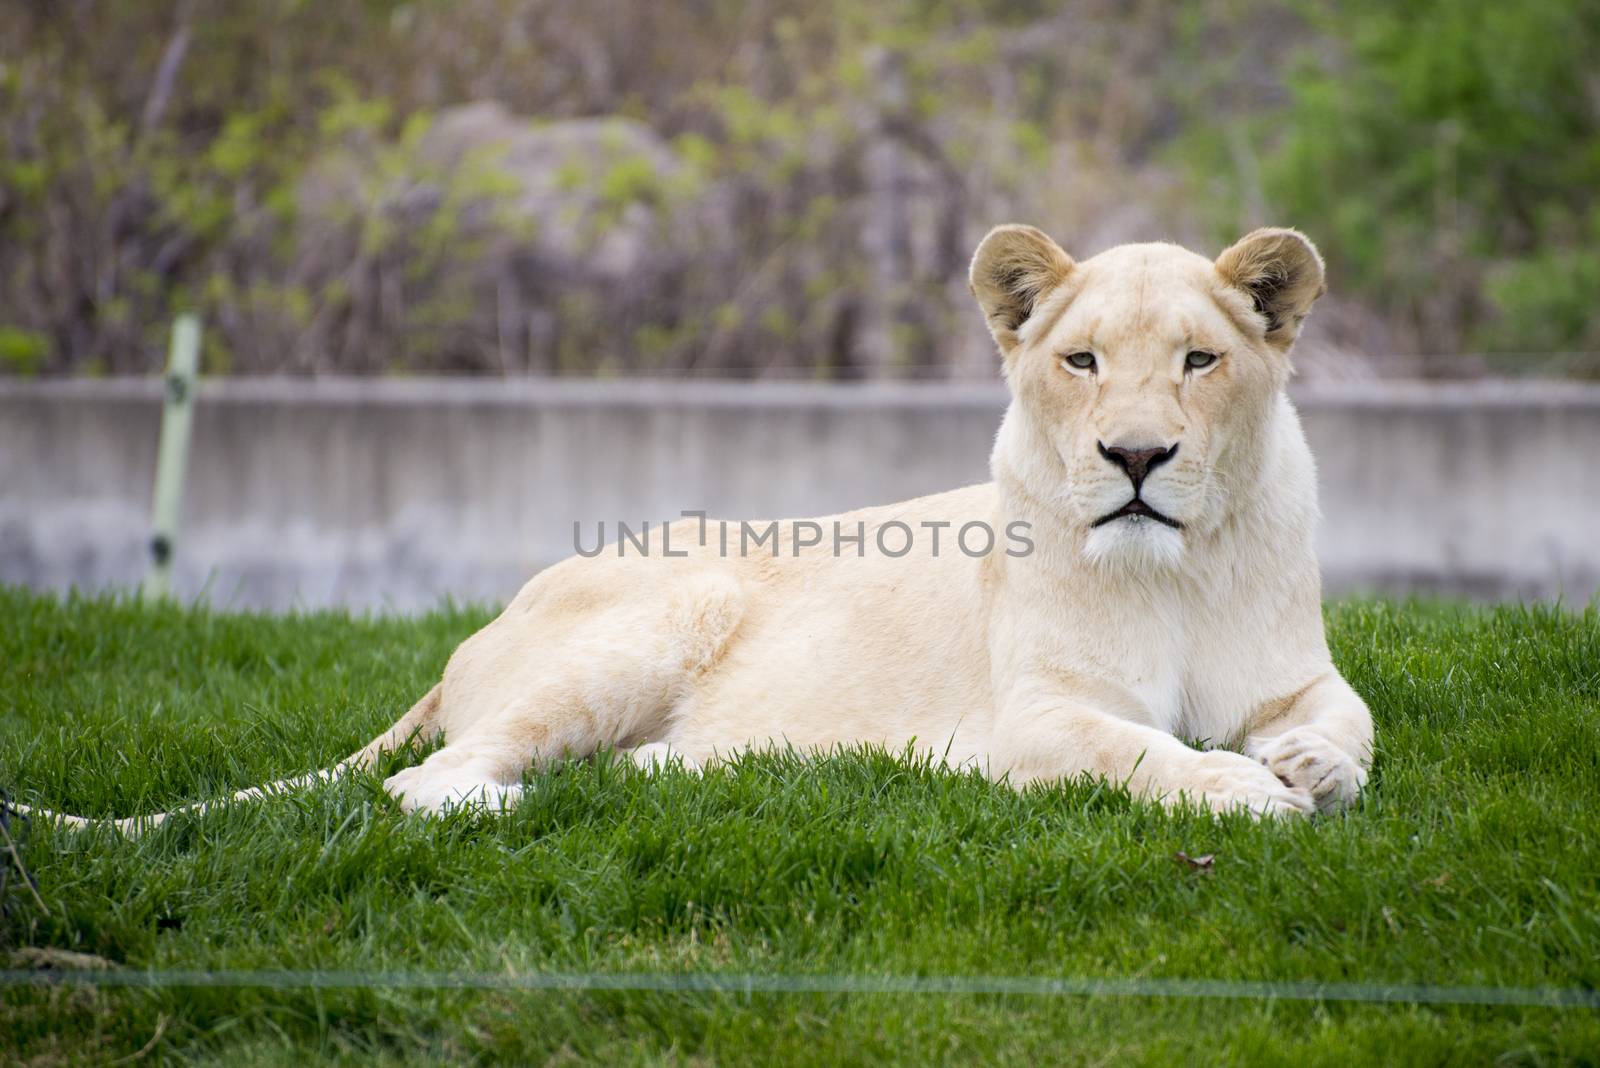 White lioness in toronto zoo by rgbspace